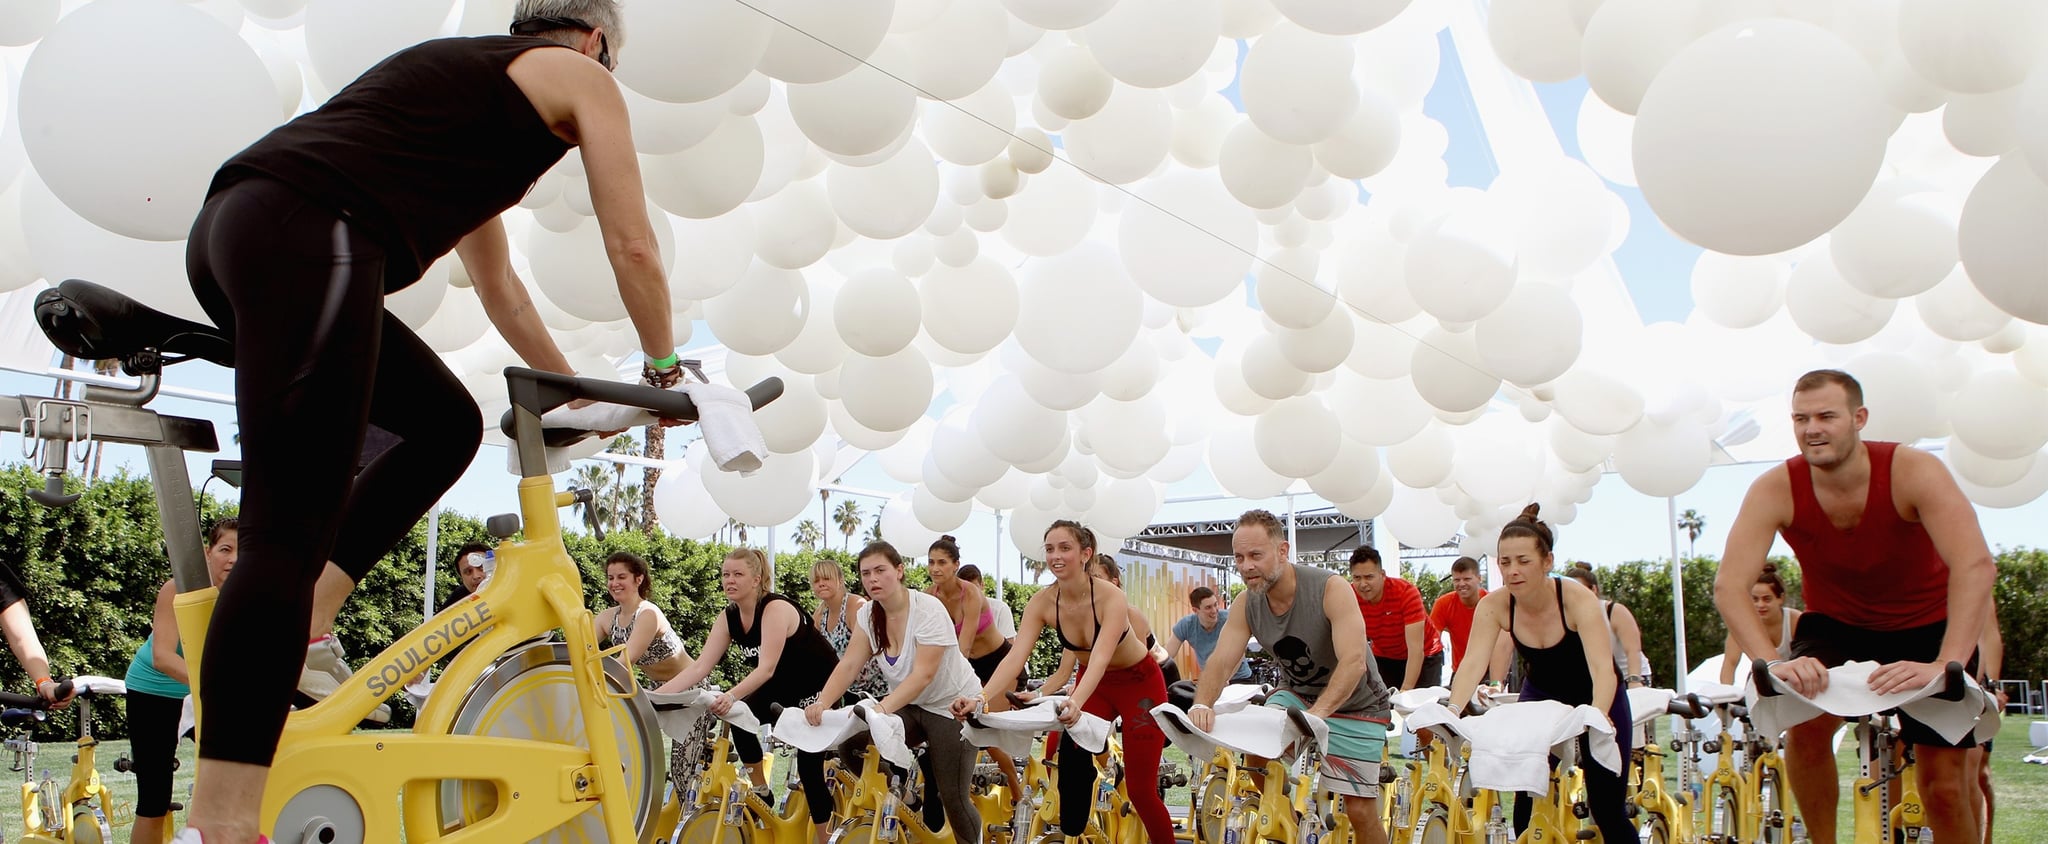 soulcycle spin bike for sale